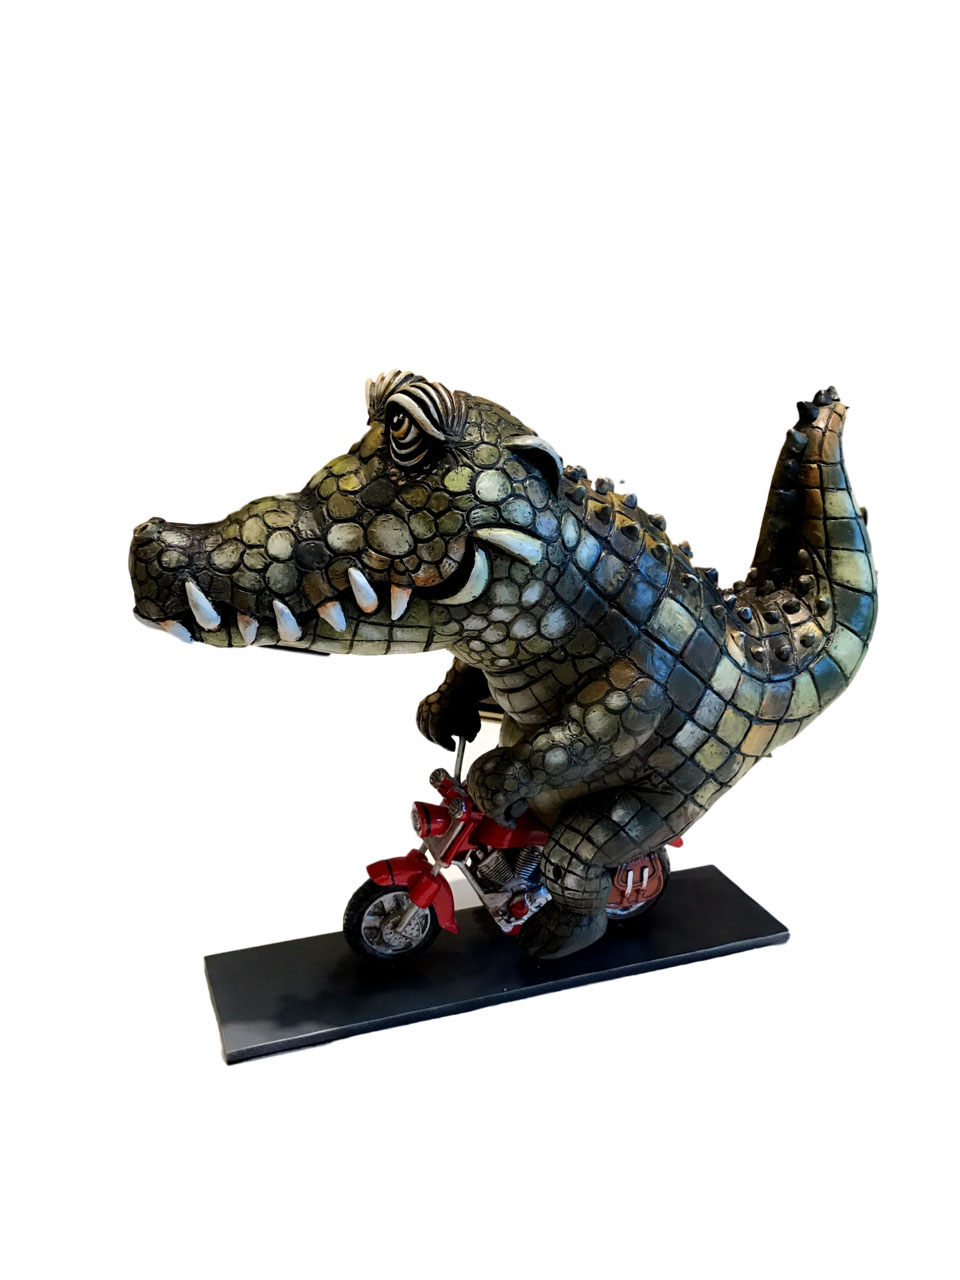 Signed, limited edition gator sculpture